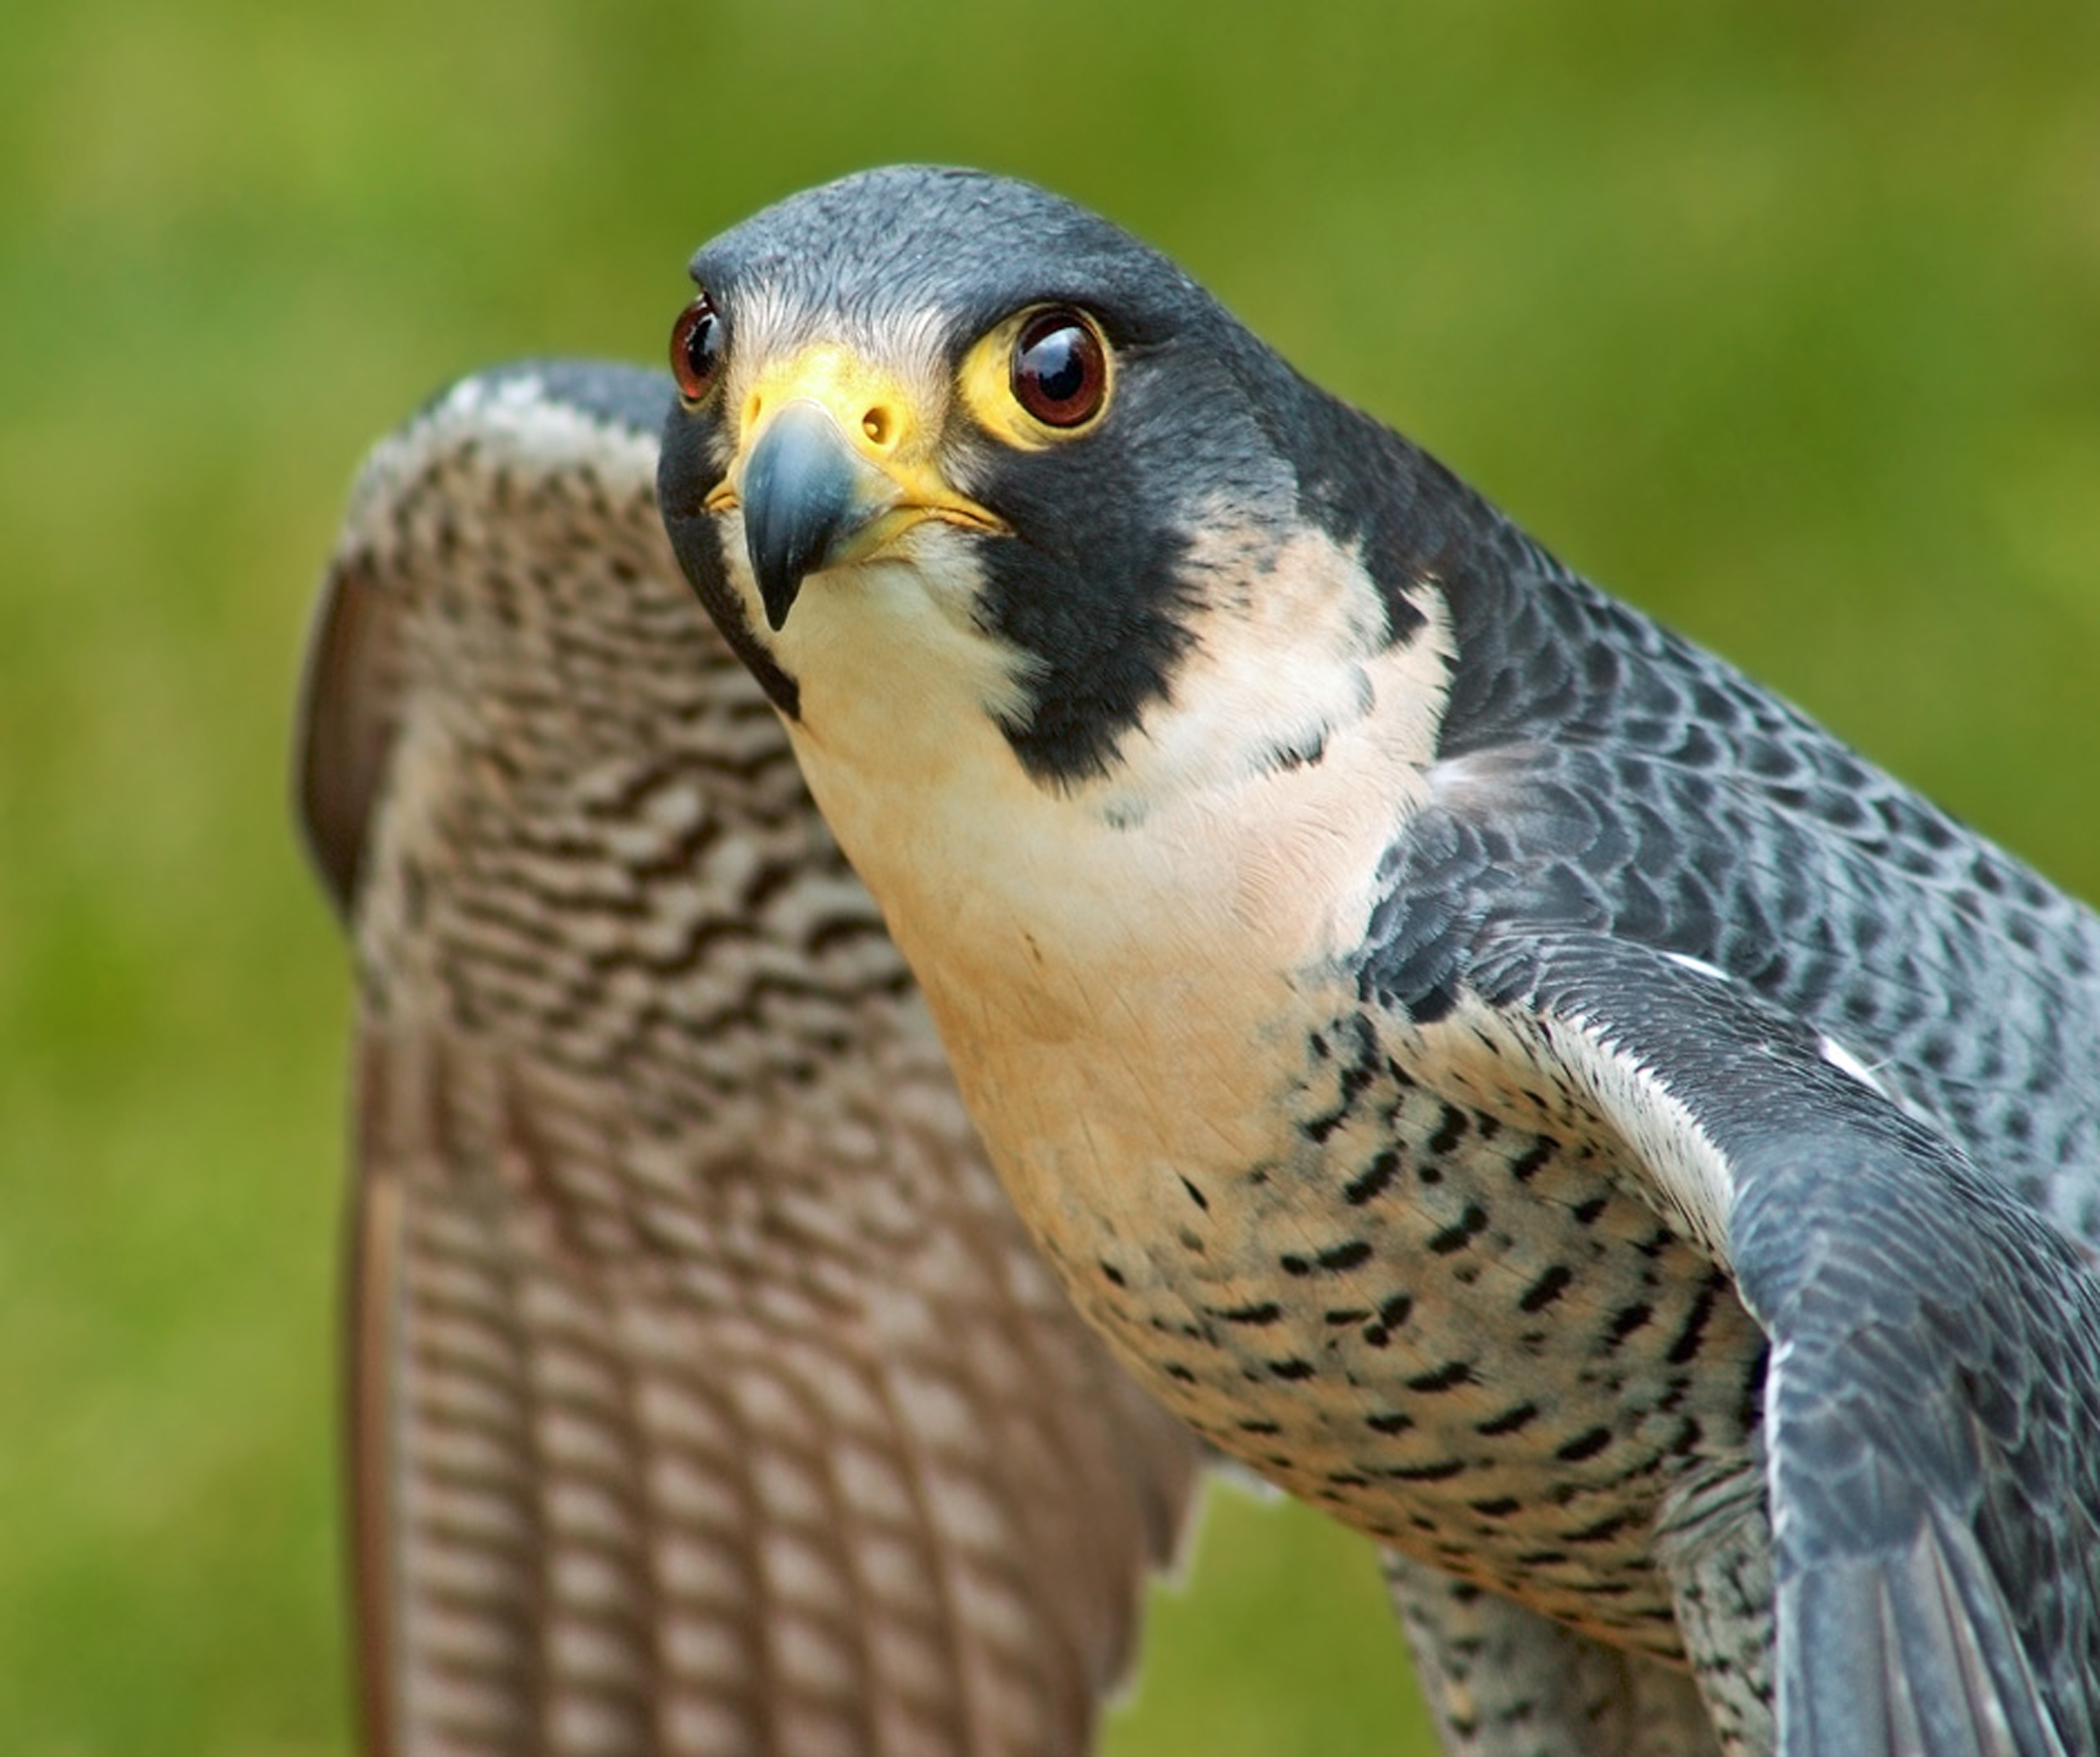 Peregrine Falcons – Hacked On | Tallahassee.com Community Blogs